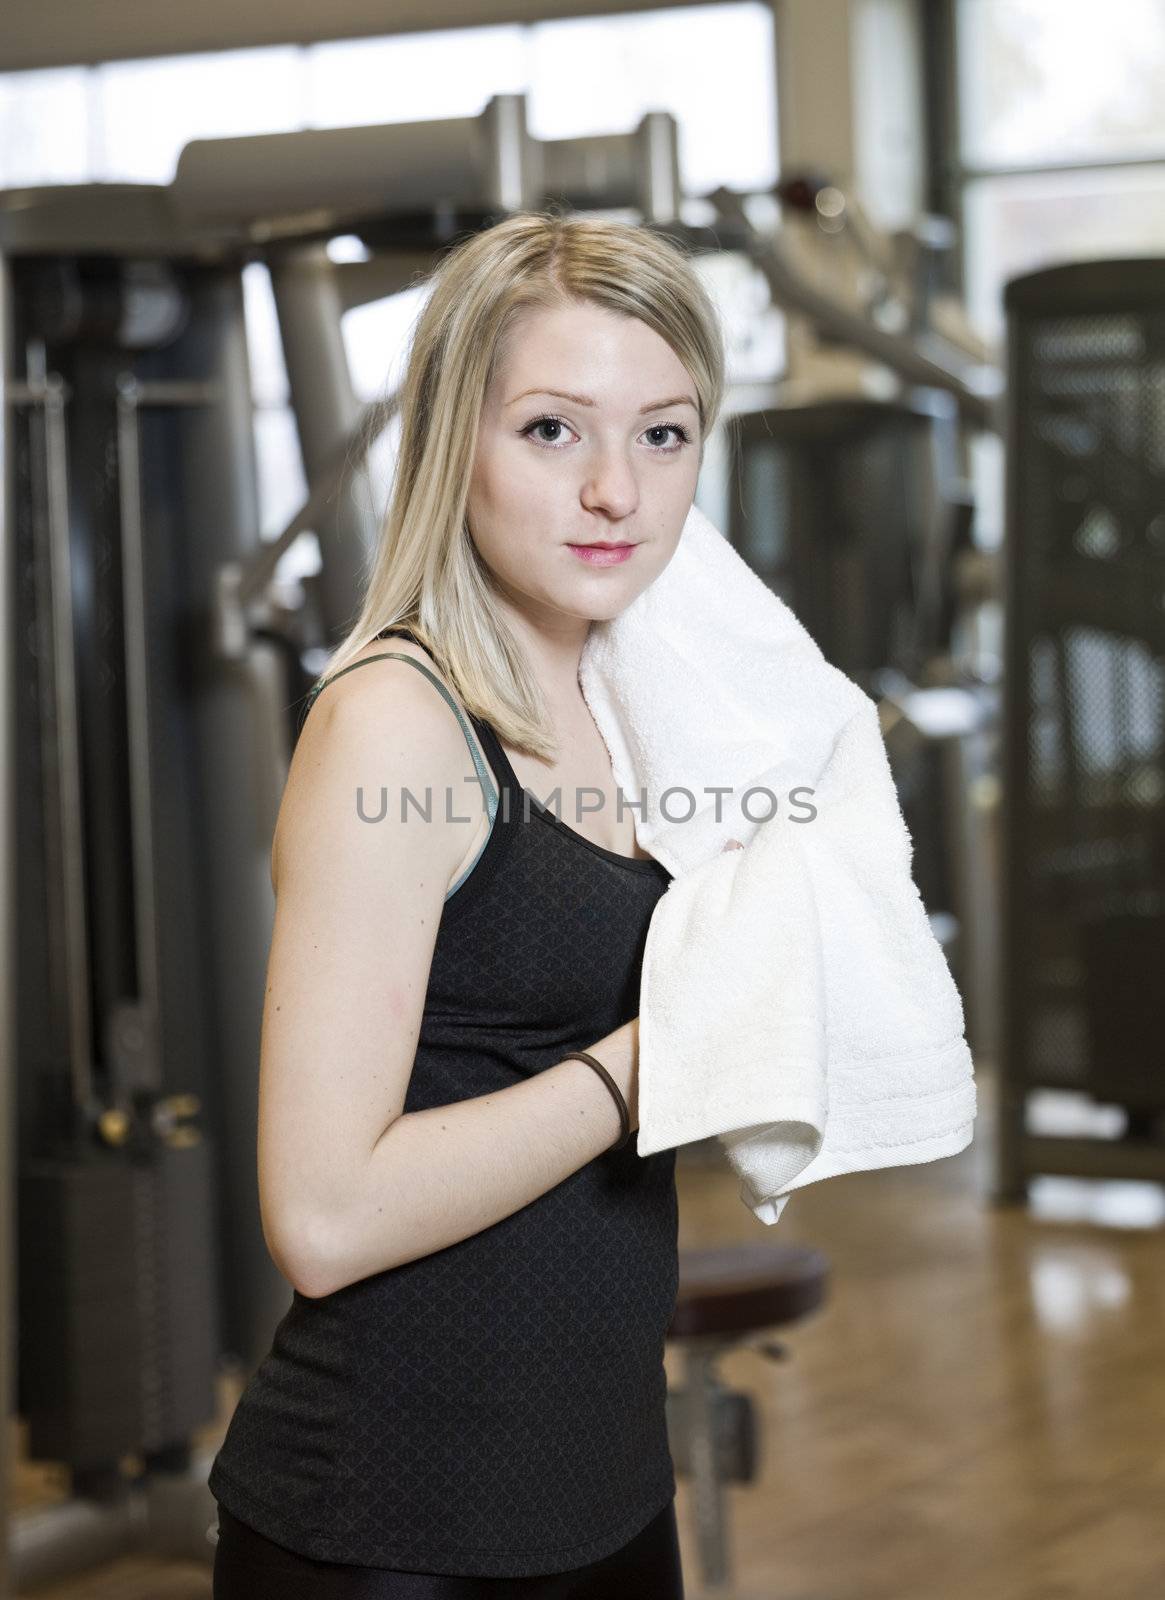 Portrait of a young woman at a healtch club